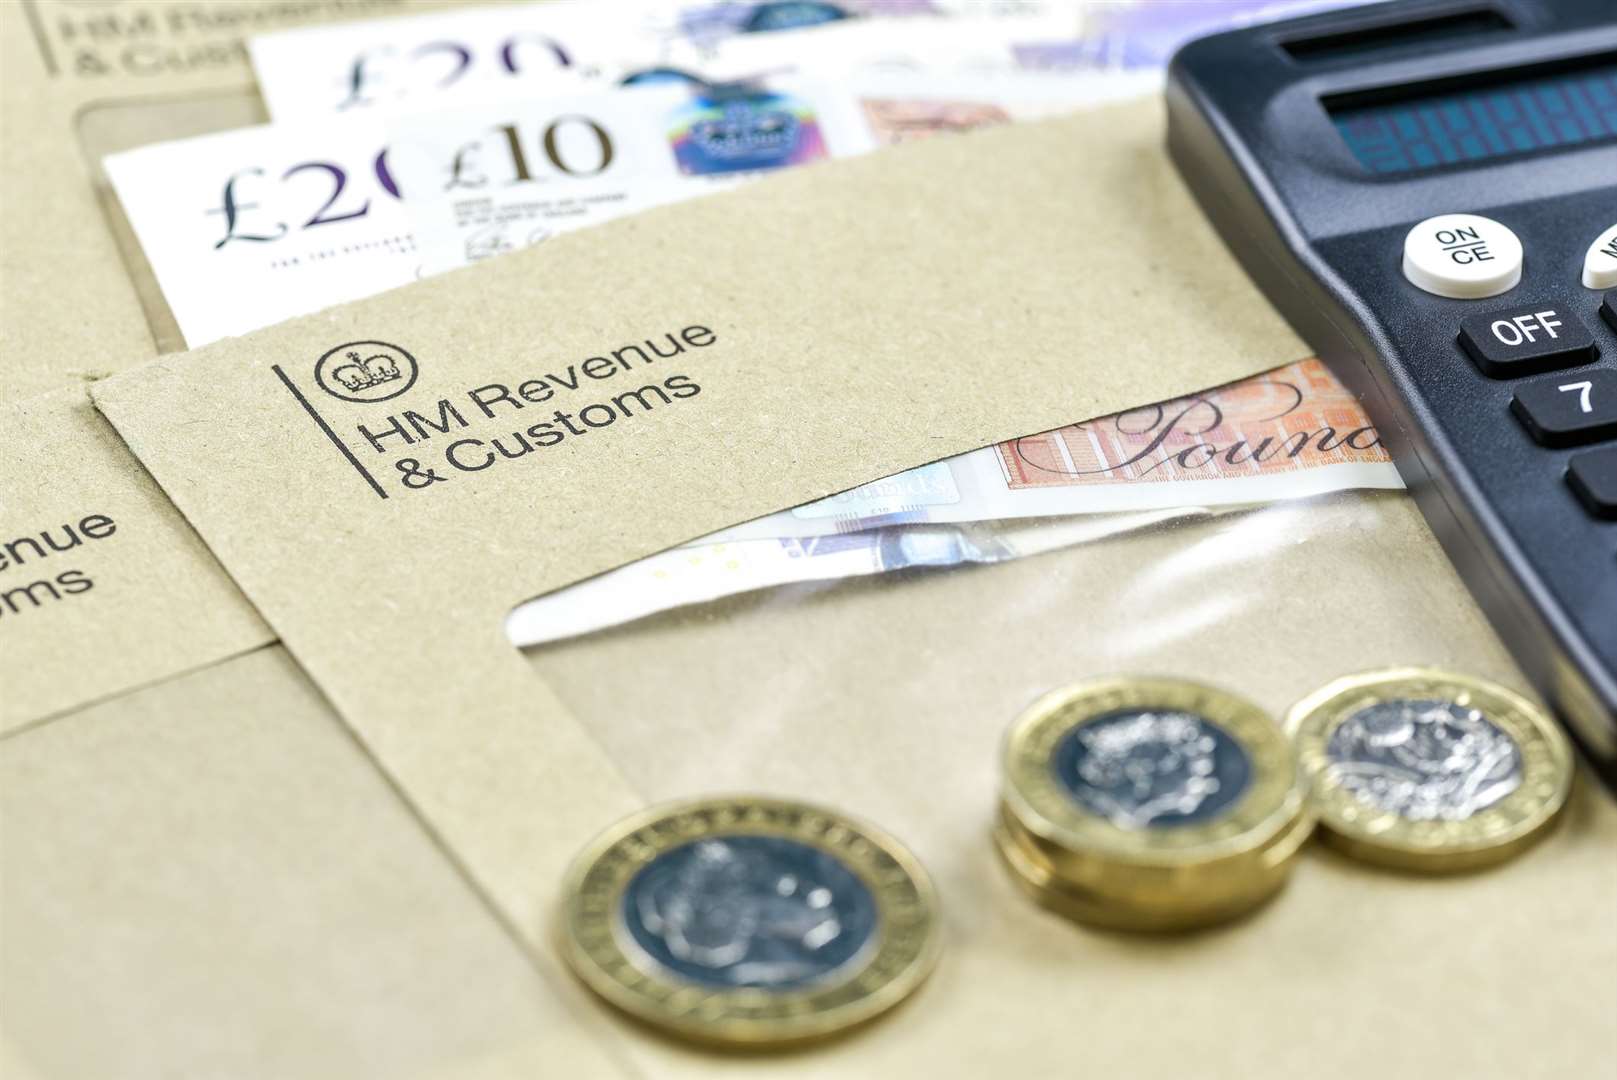 HMRC was initially due to stop Post Office card account payments from December 1